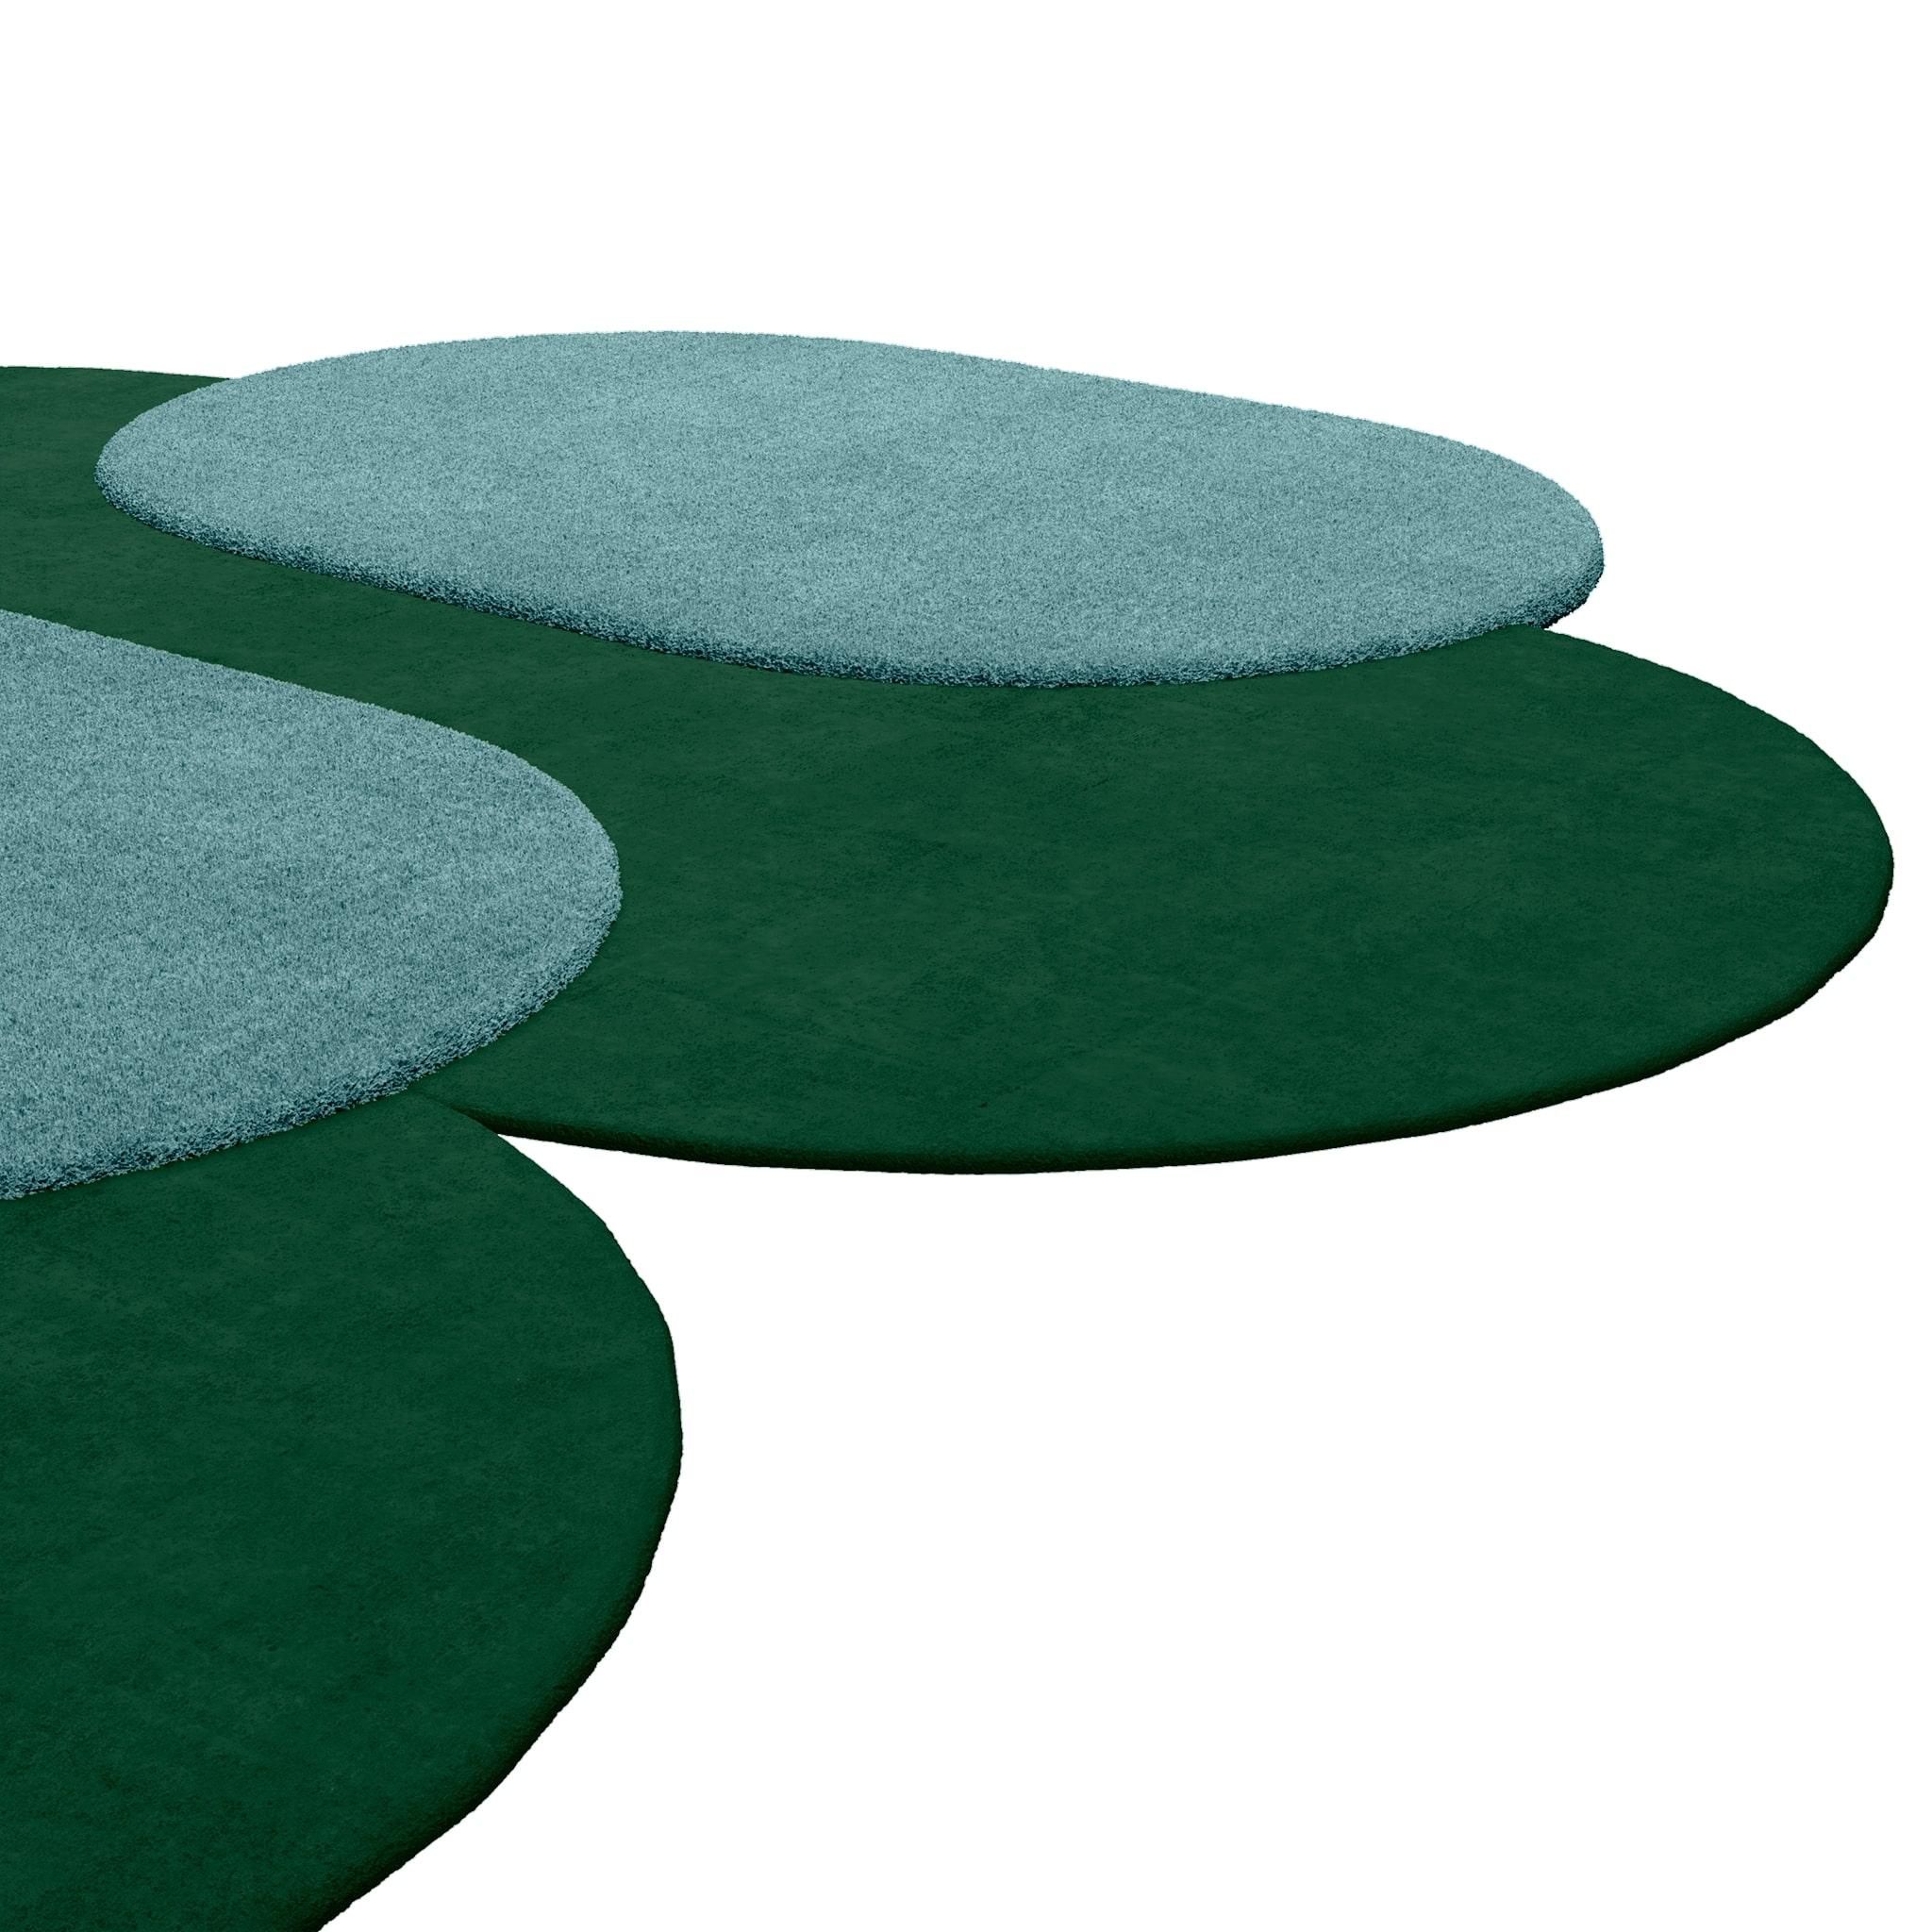 Tapis Shaped #048 is a Modern style rug in murky green and light blue, a classic yet sophisticated color combination.
With an irregular shape that juxtaposes oval circles with contrasting colors, this is a design masterpiece that makes a statement